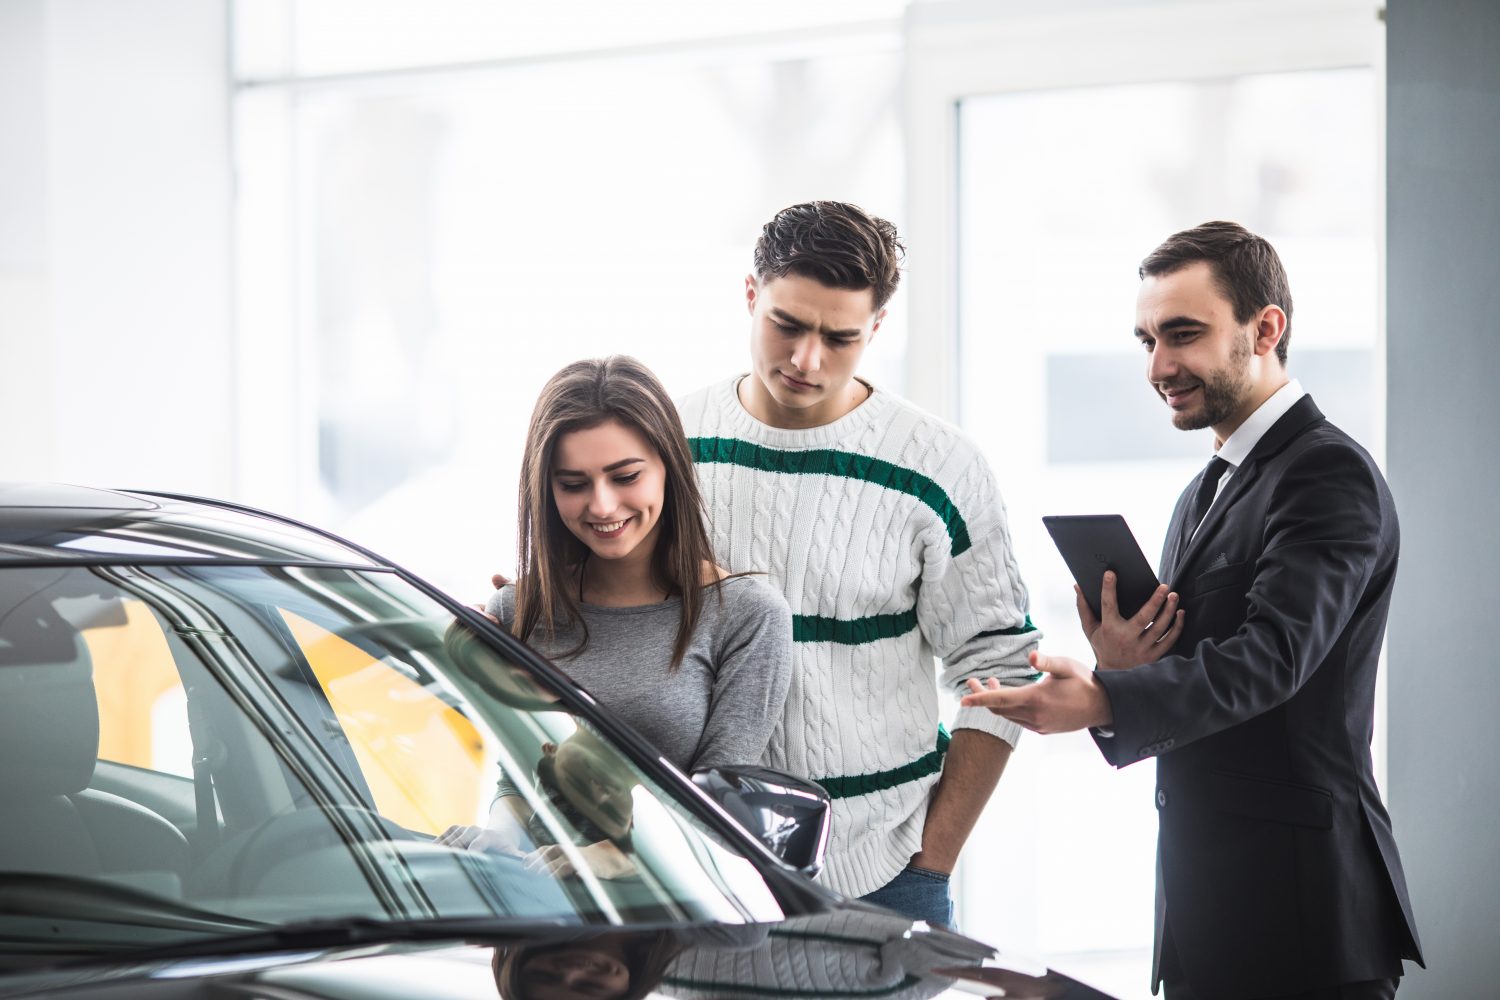 On March 25, CarGurus, the leading digital auto platform, published its sixth annual U.S. Consumer Insights Report amid recent market changes